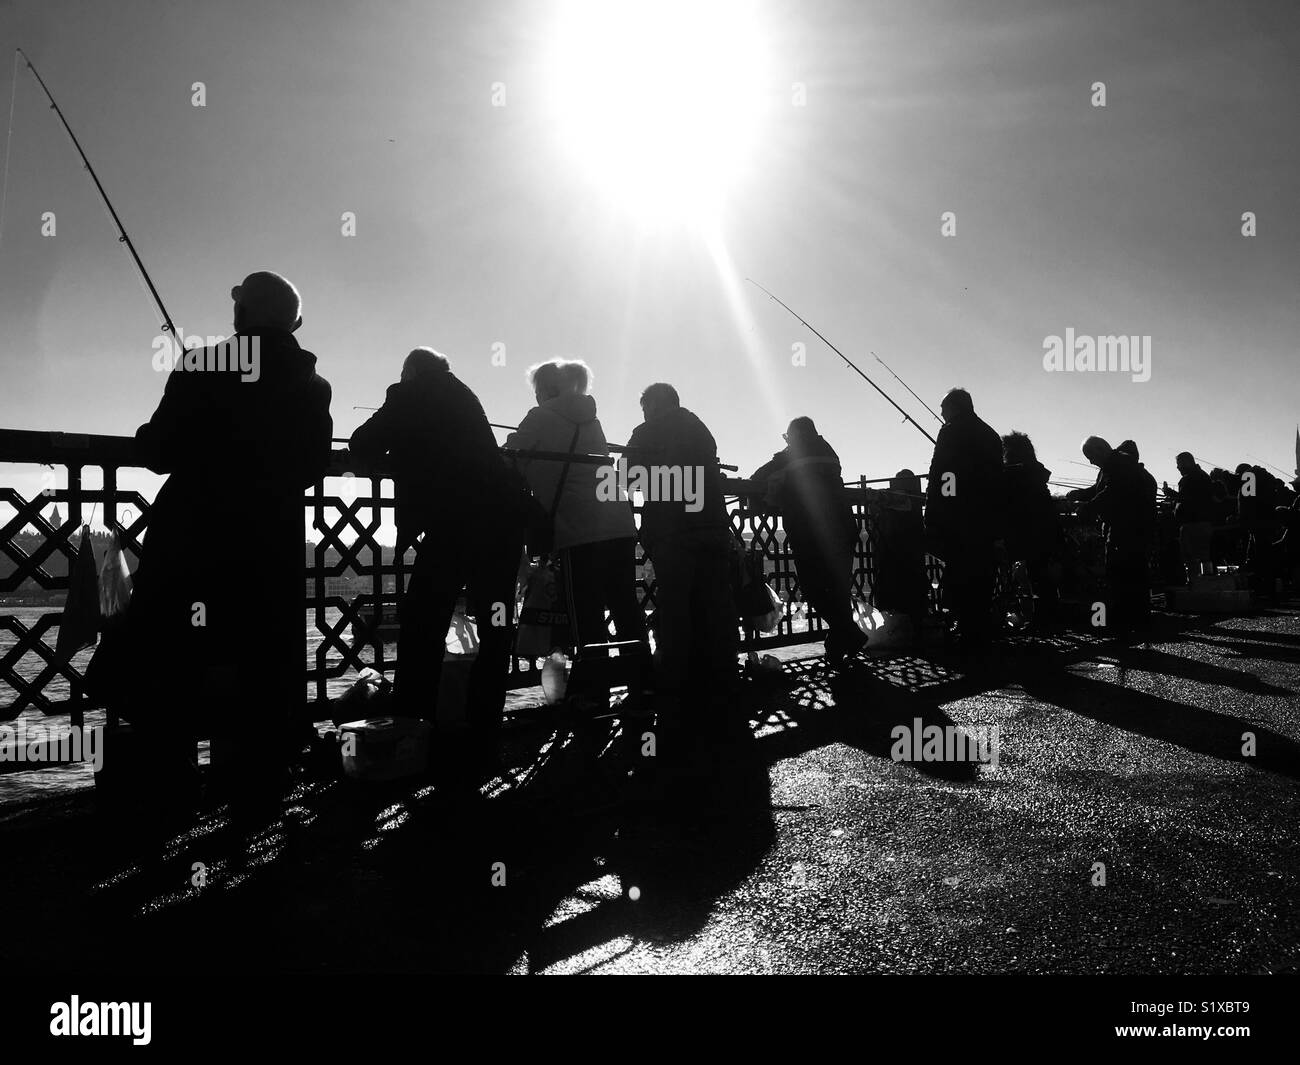 Silhouette of people fishing on Galata Bridge over the golden horn in istanbul Turkey Stock Photo